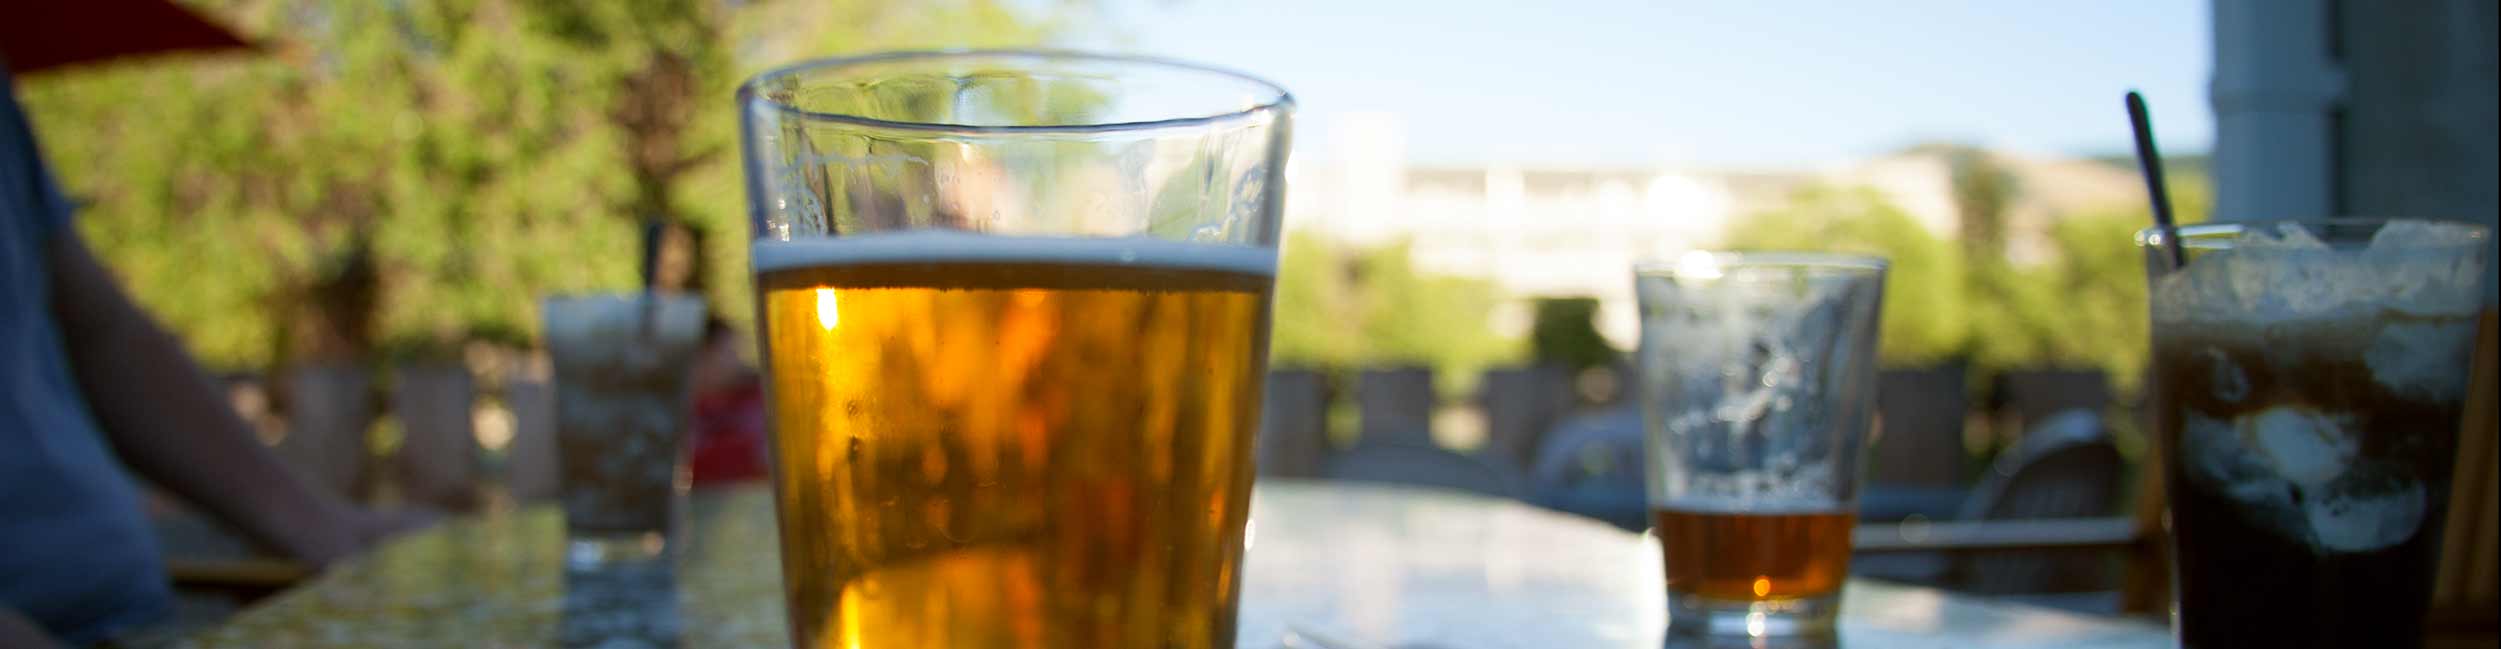 Drink Some Local Beer At A Missoula Brewery